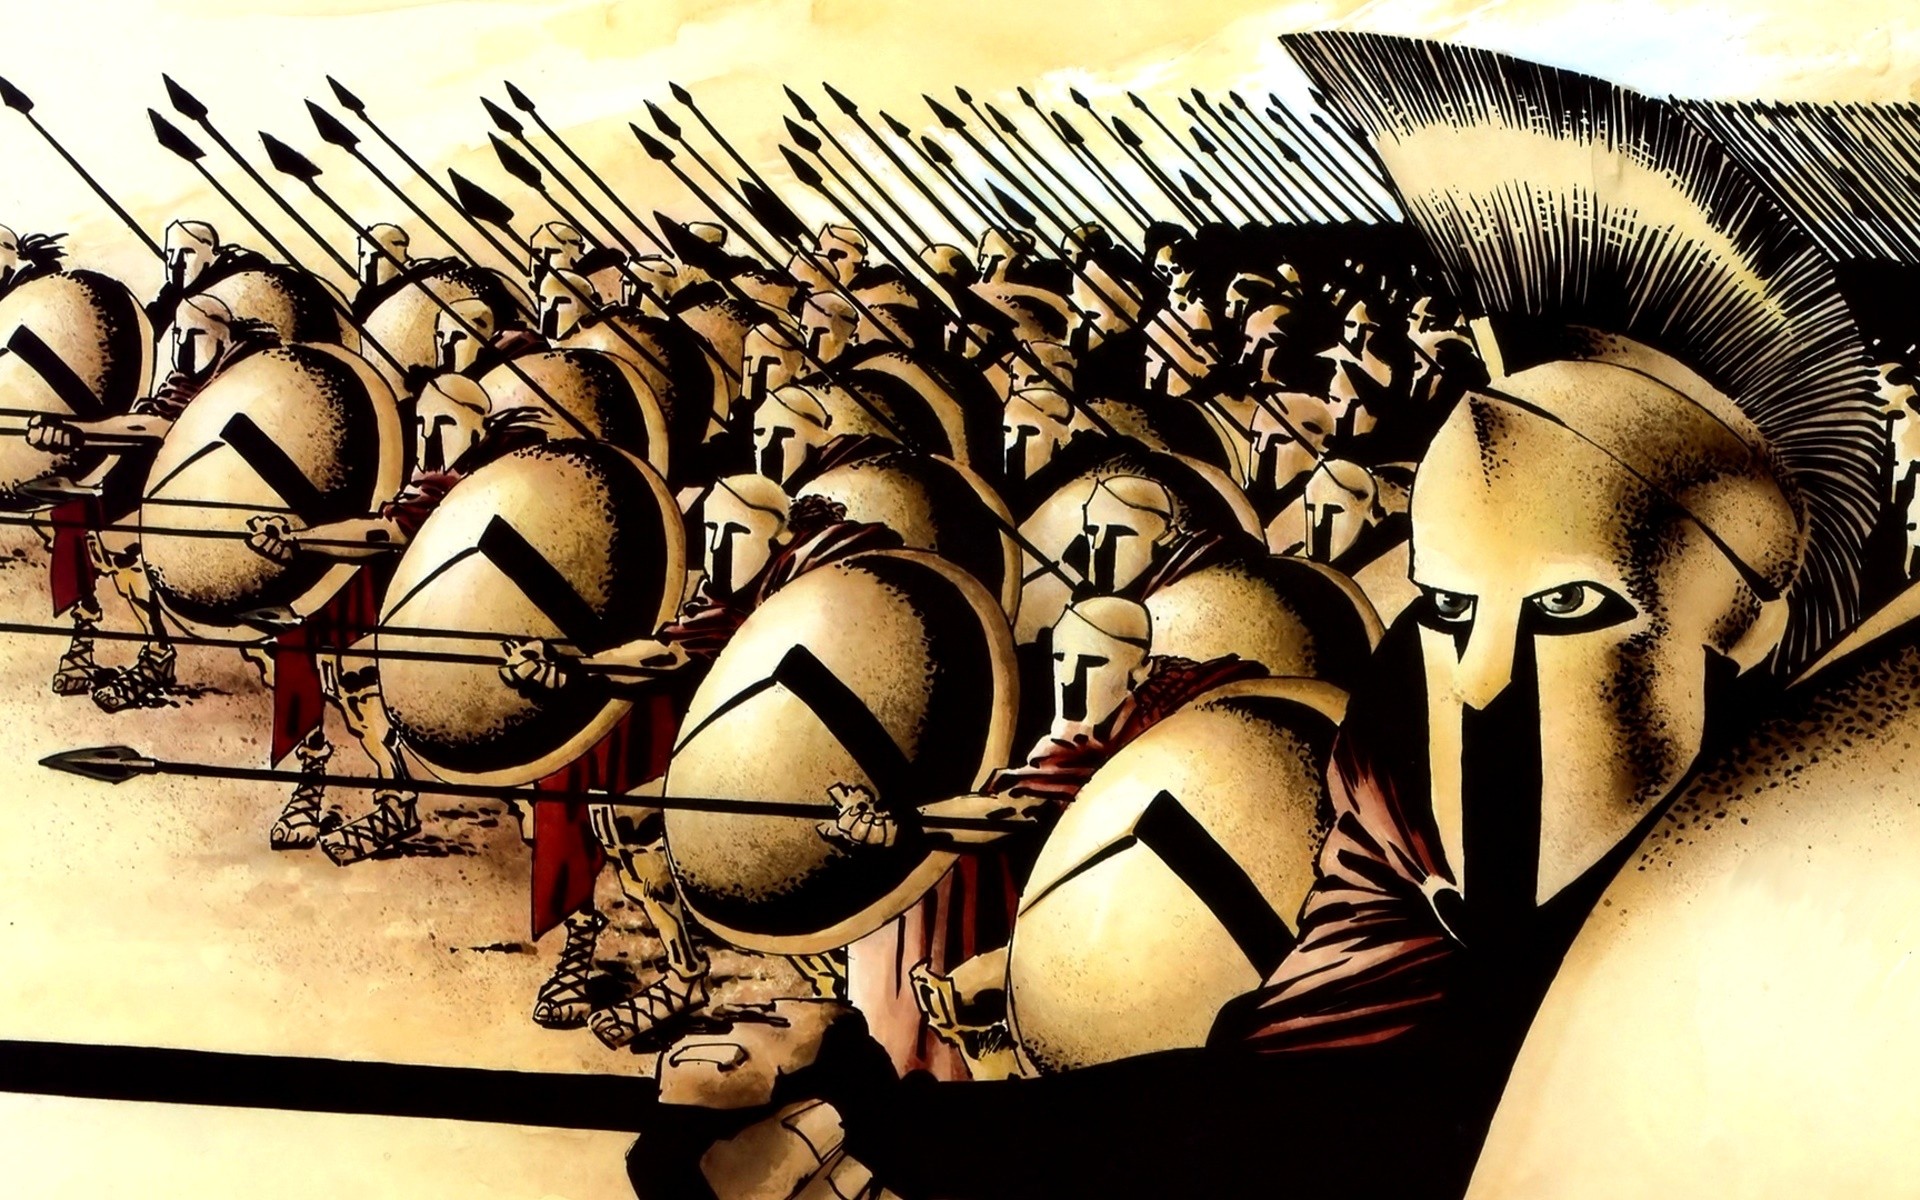 Wallpapers 300 Spartans spears shields on the desktop